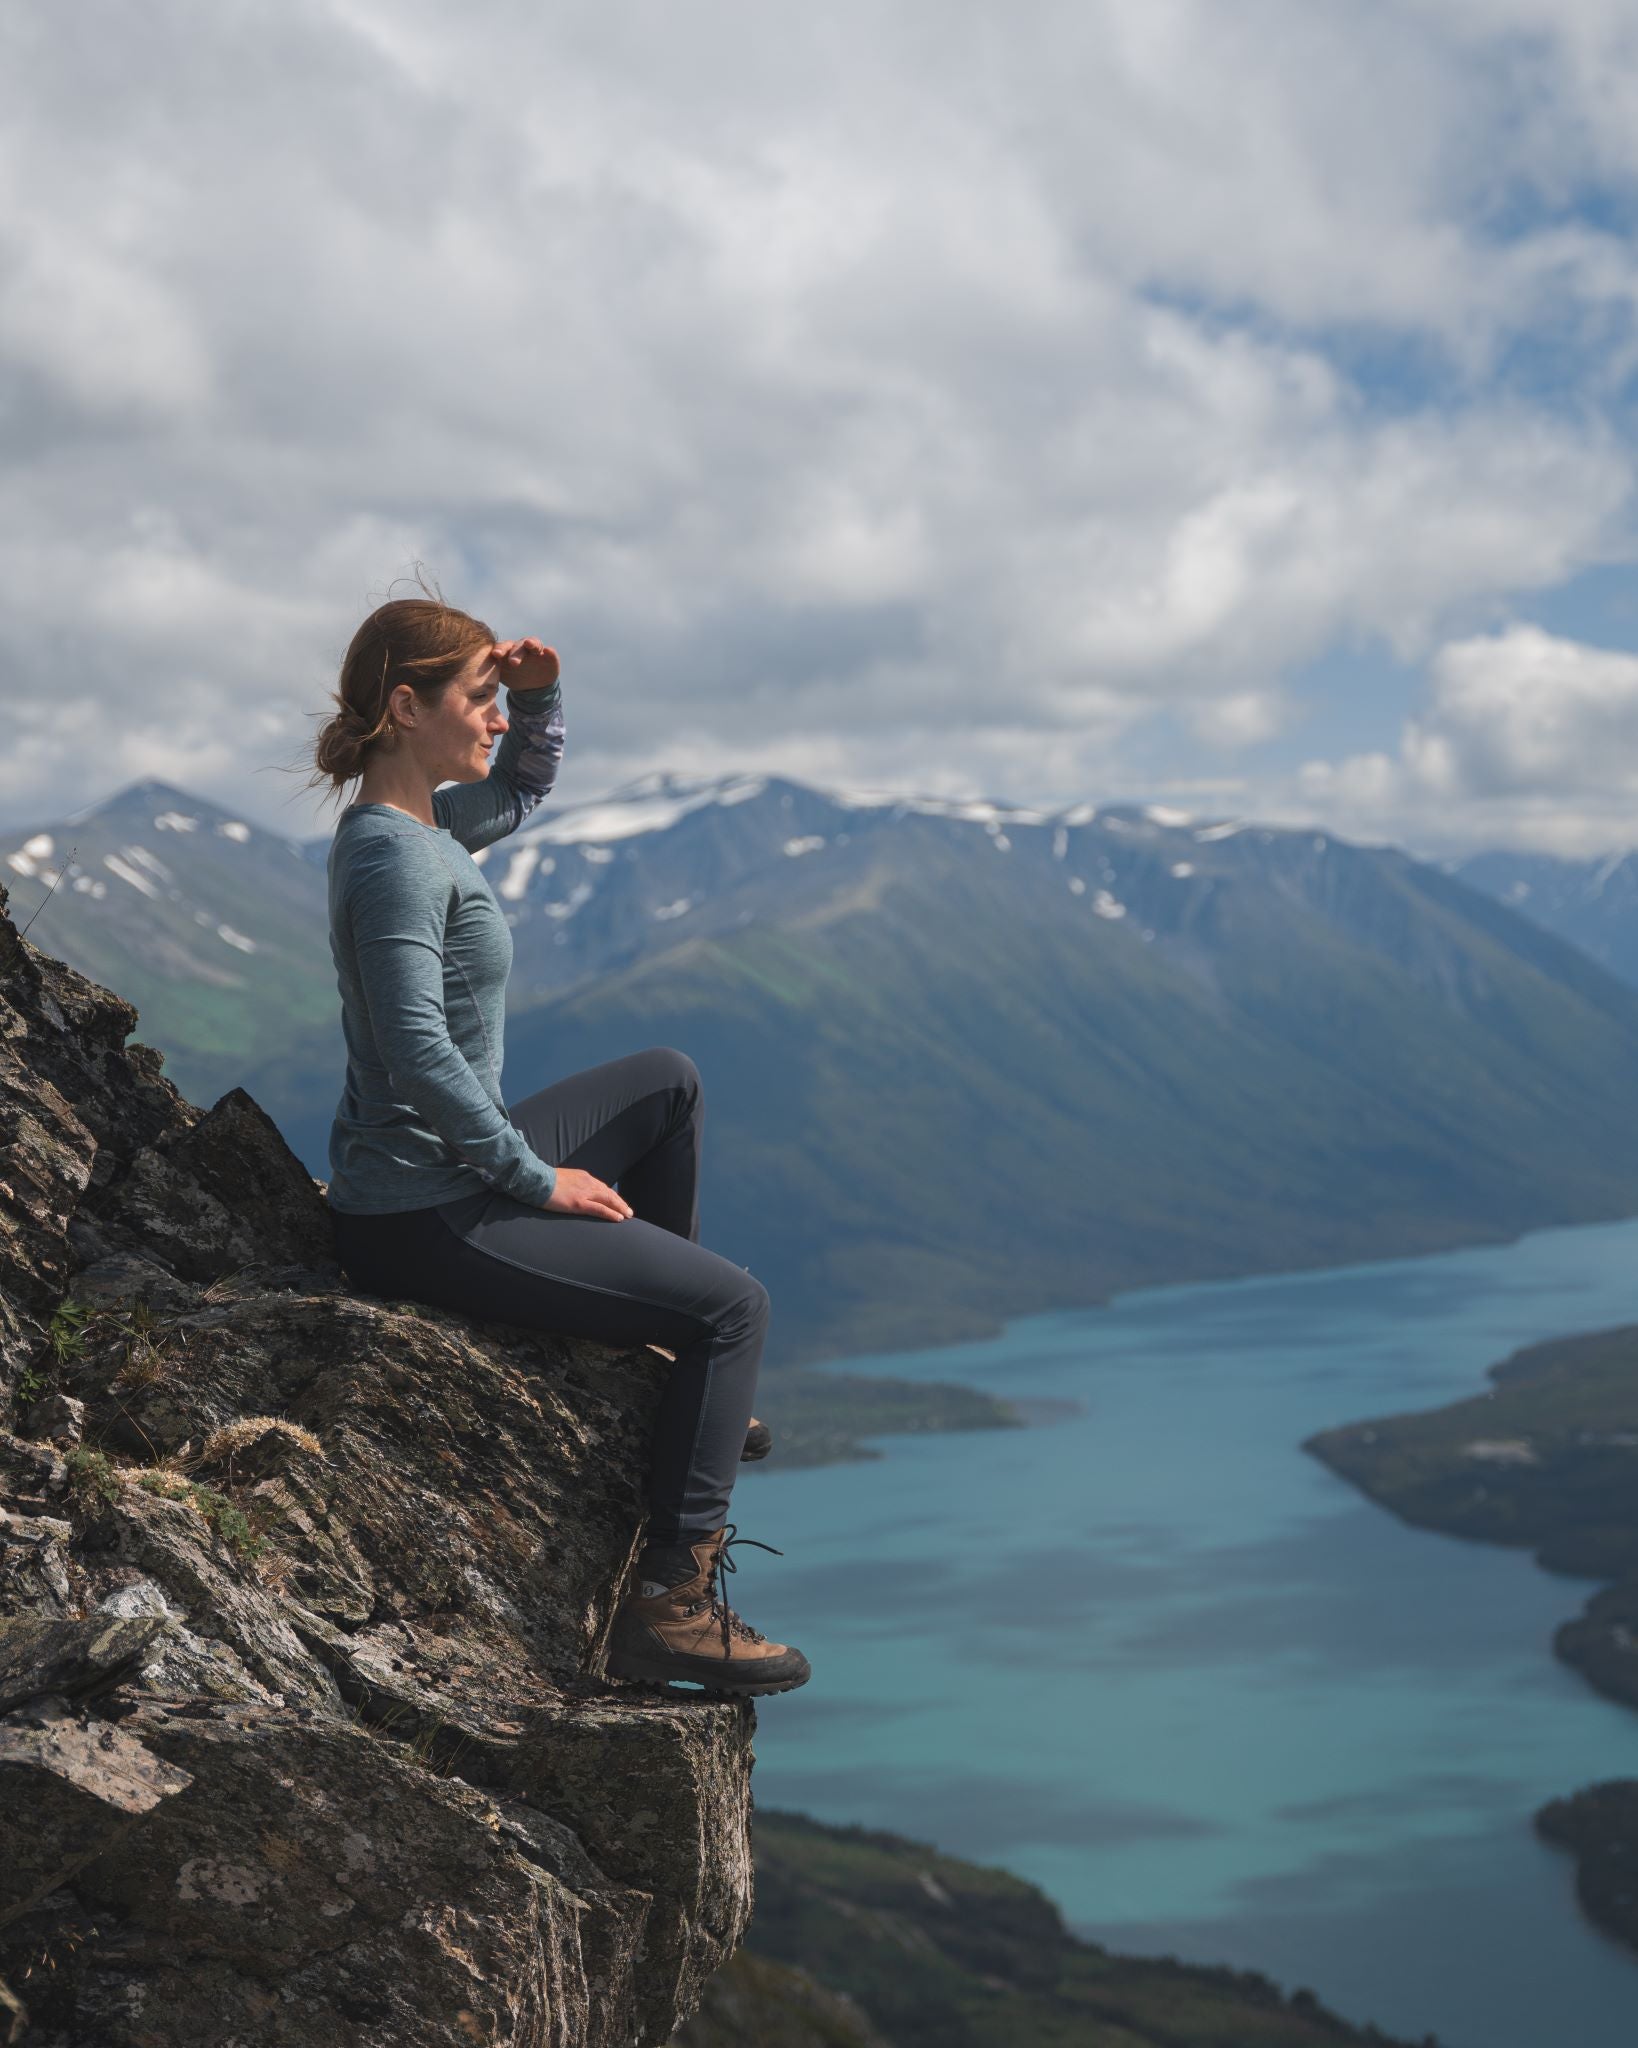 carly on the kenai photo contest alpine fit